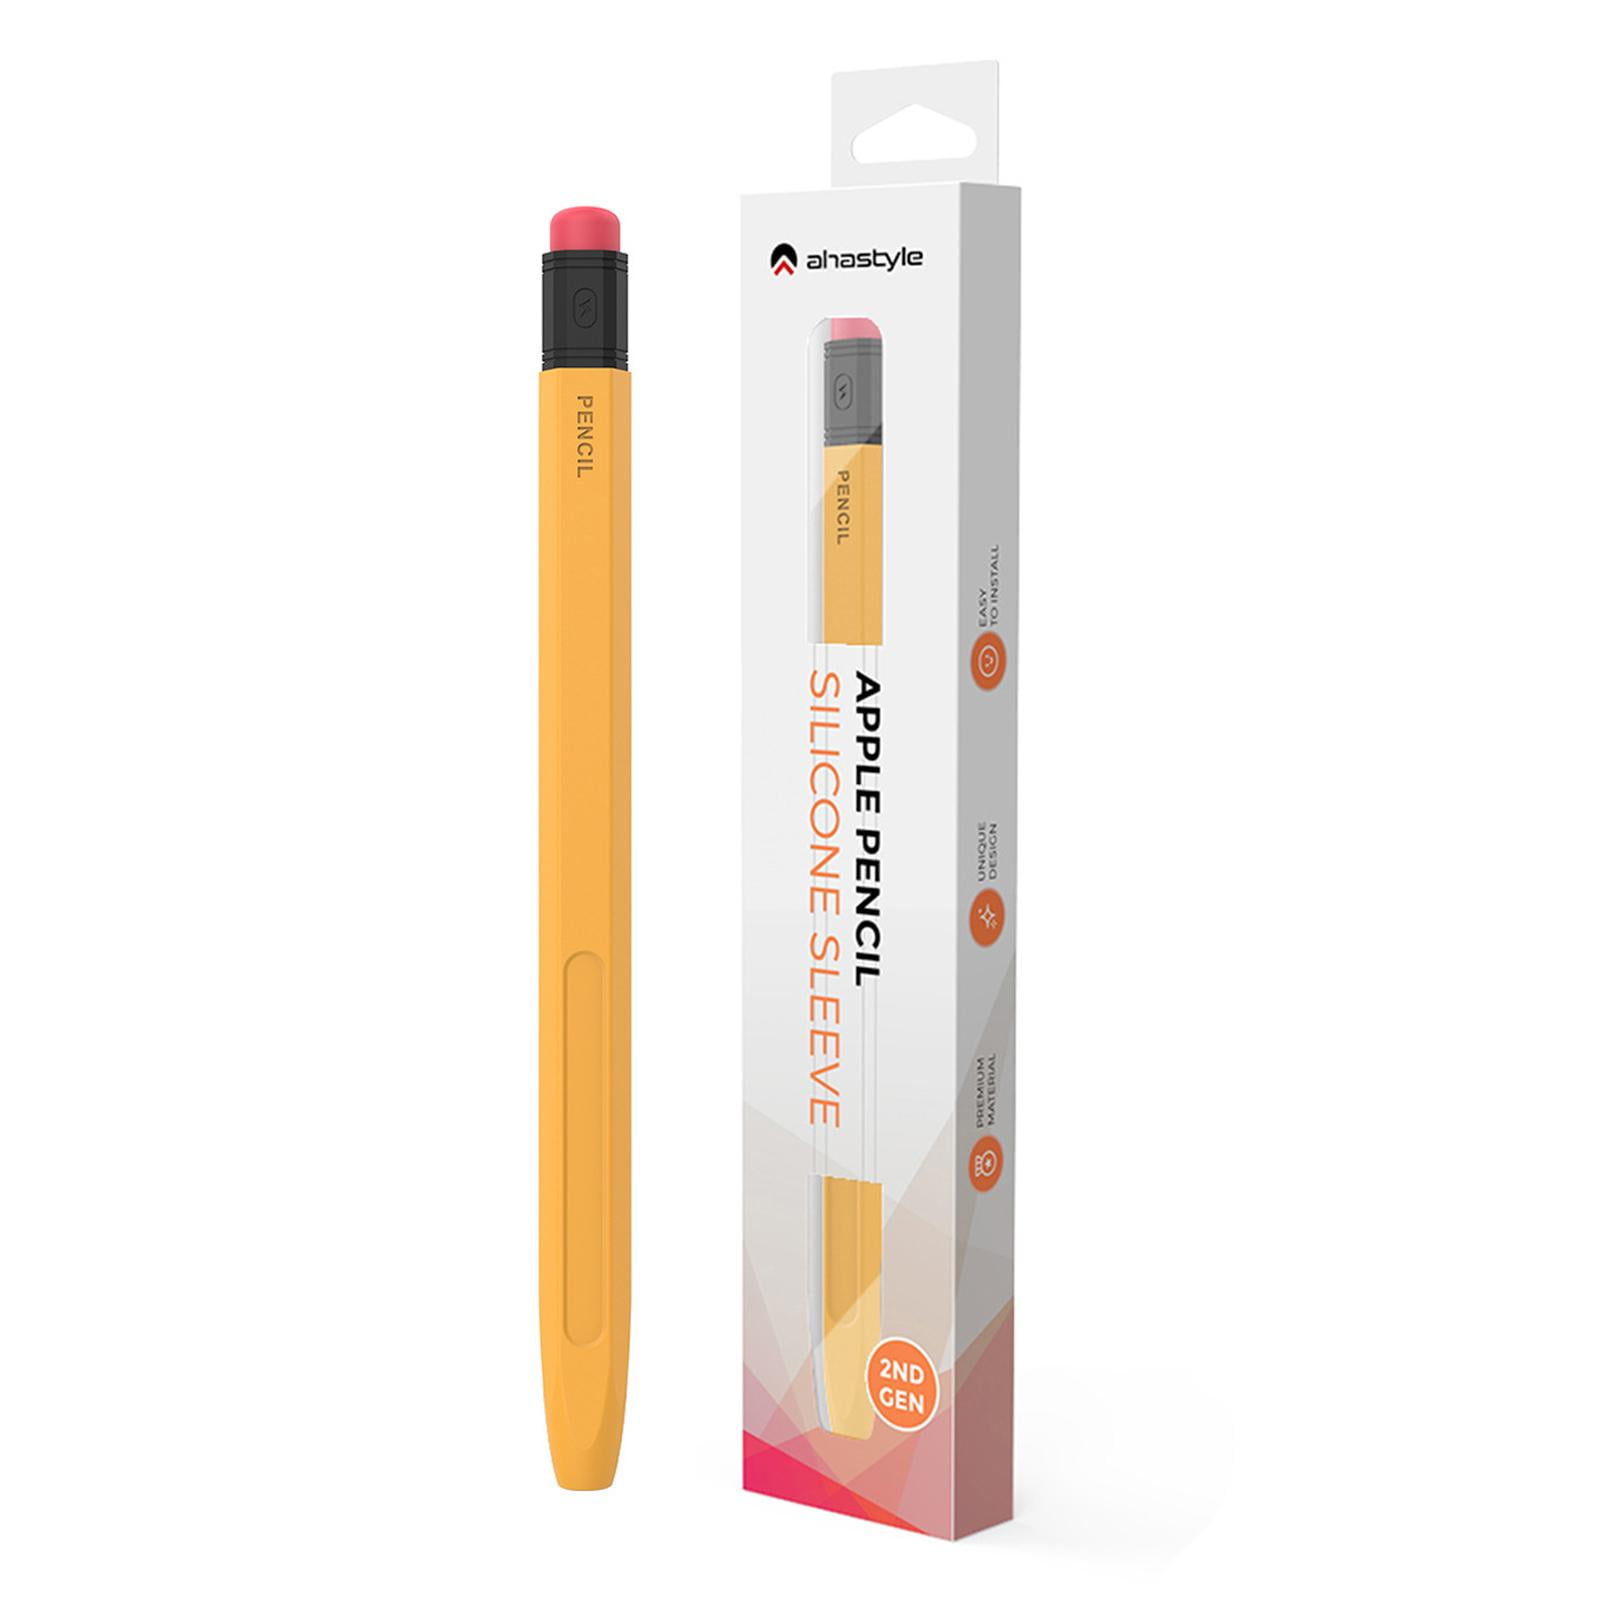 Shop Apple Pencil 2nd Gen with our Yellow Cover – elago